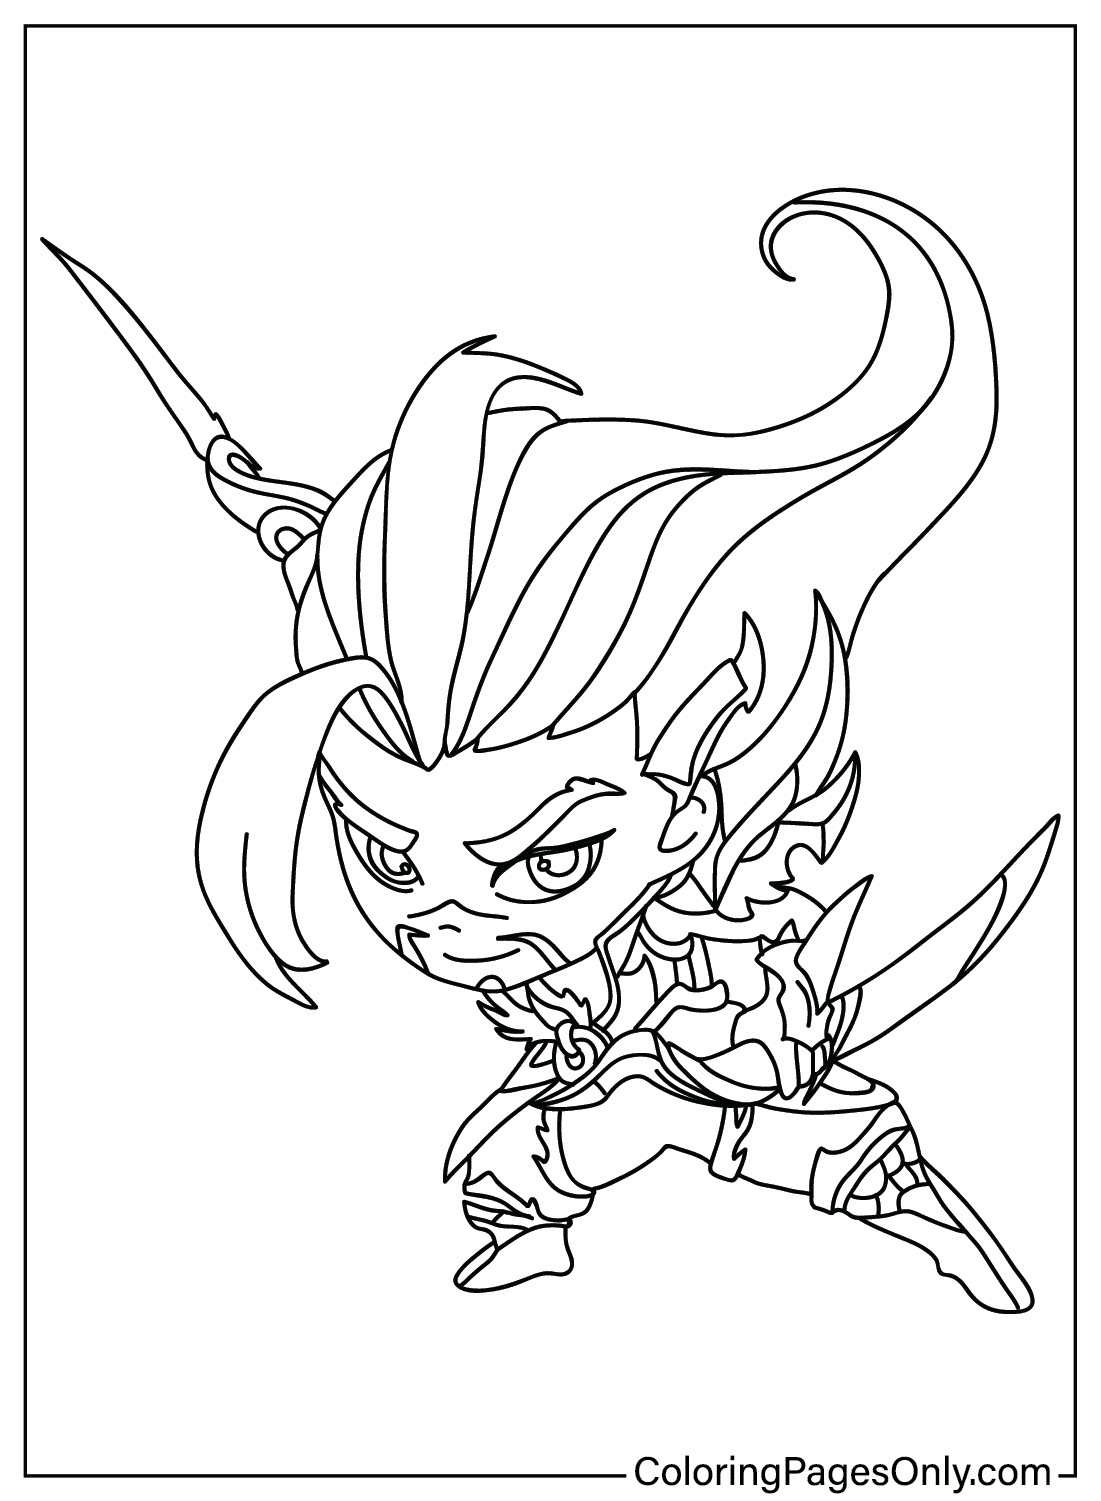 Chibi Champion Teamfight Tactics Coloring Page from Teamfight Tactics